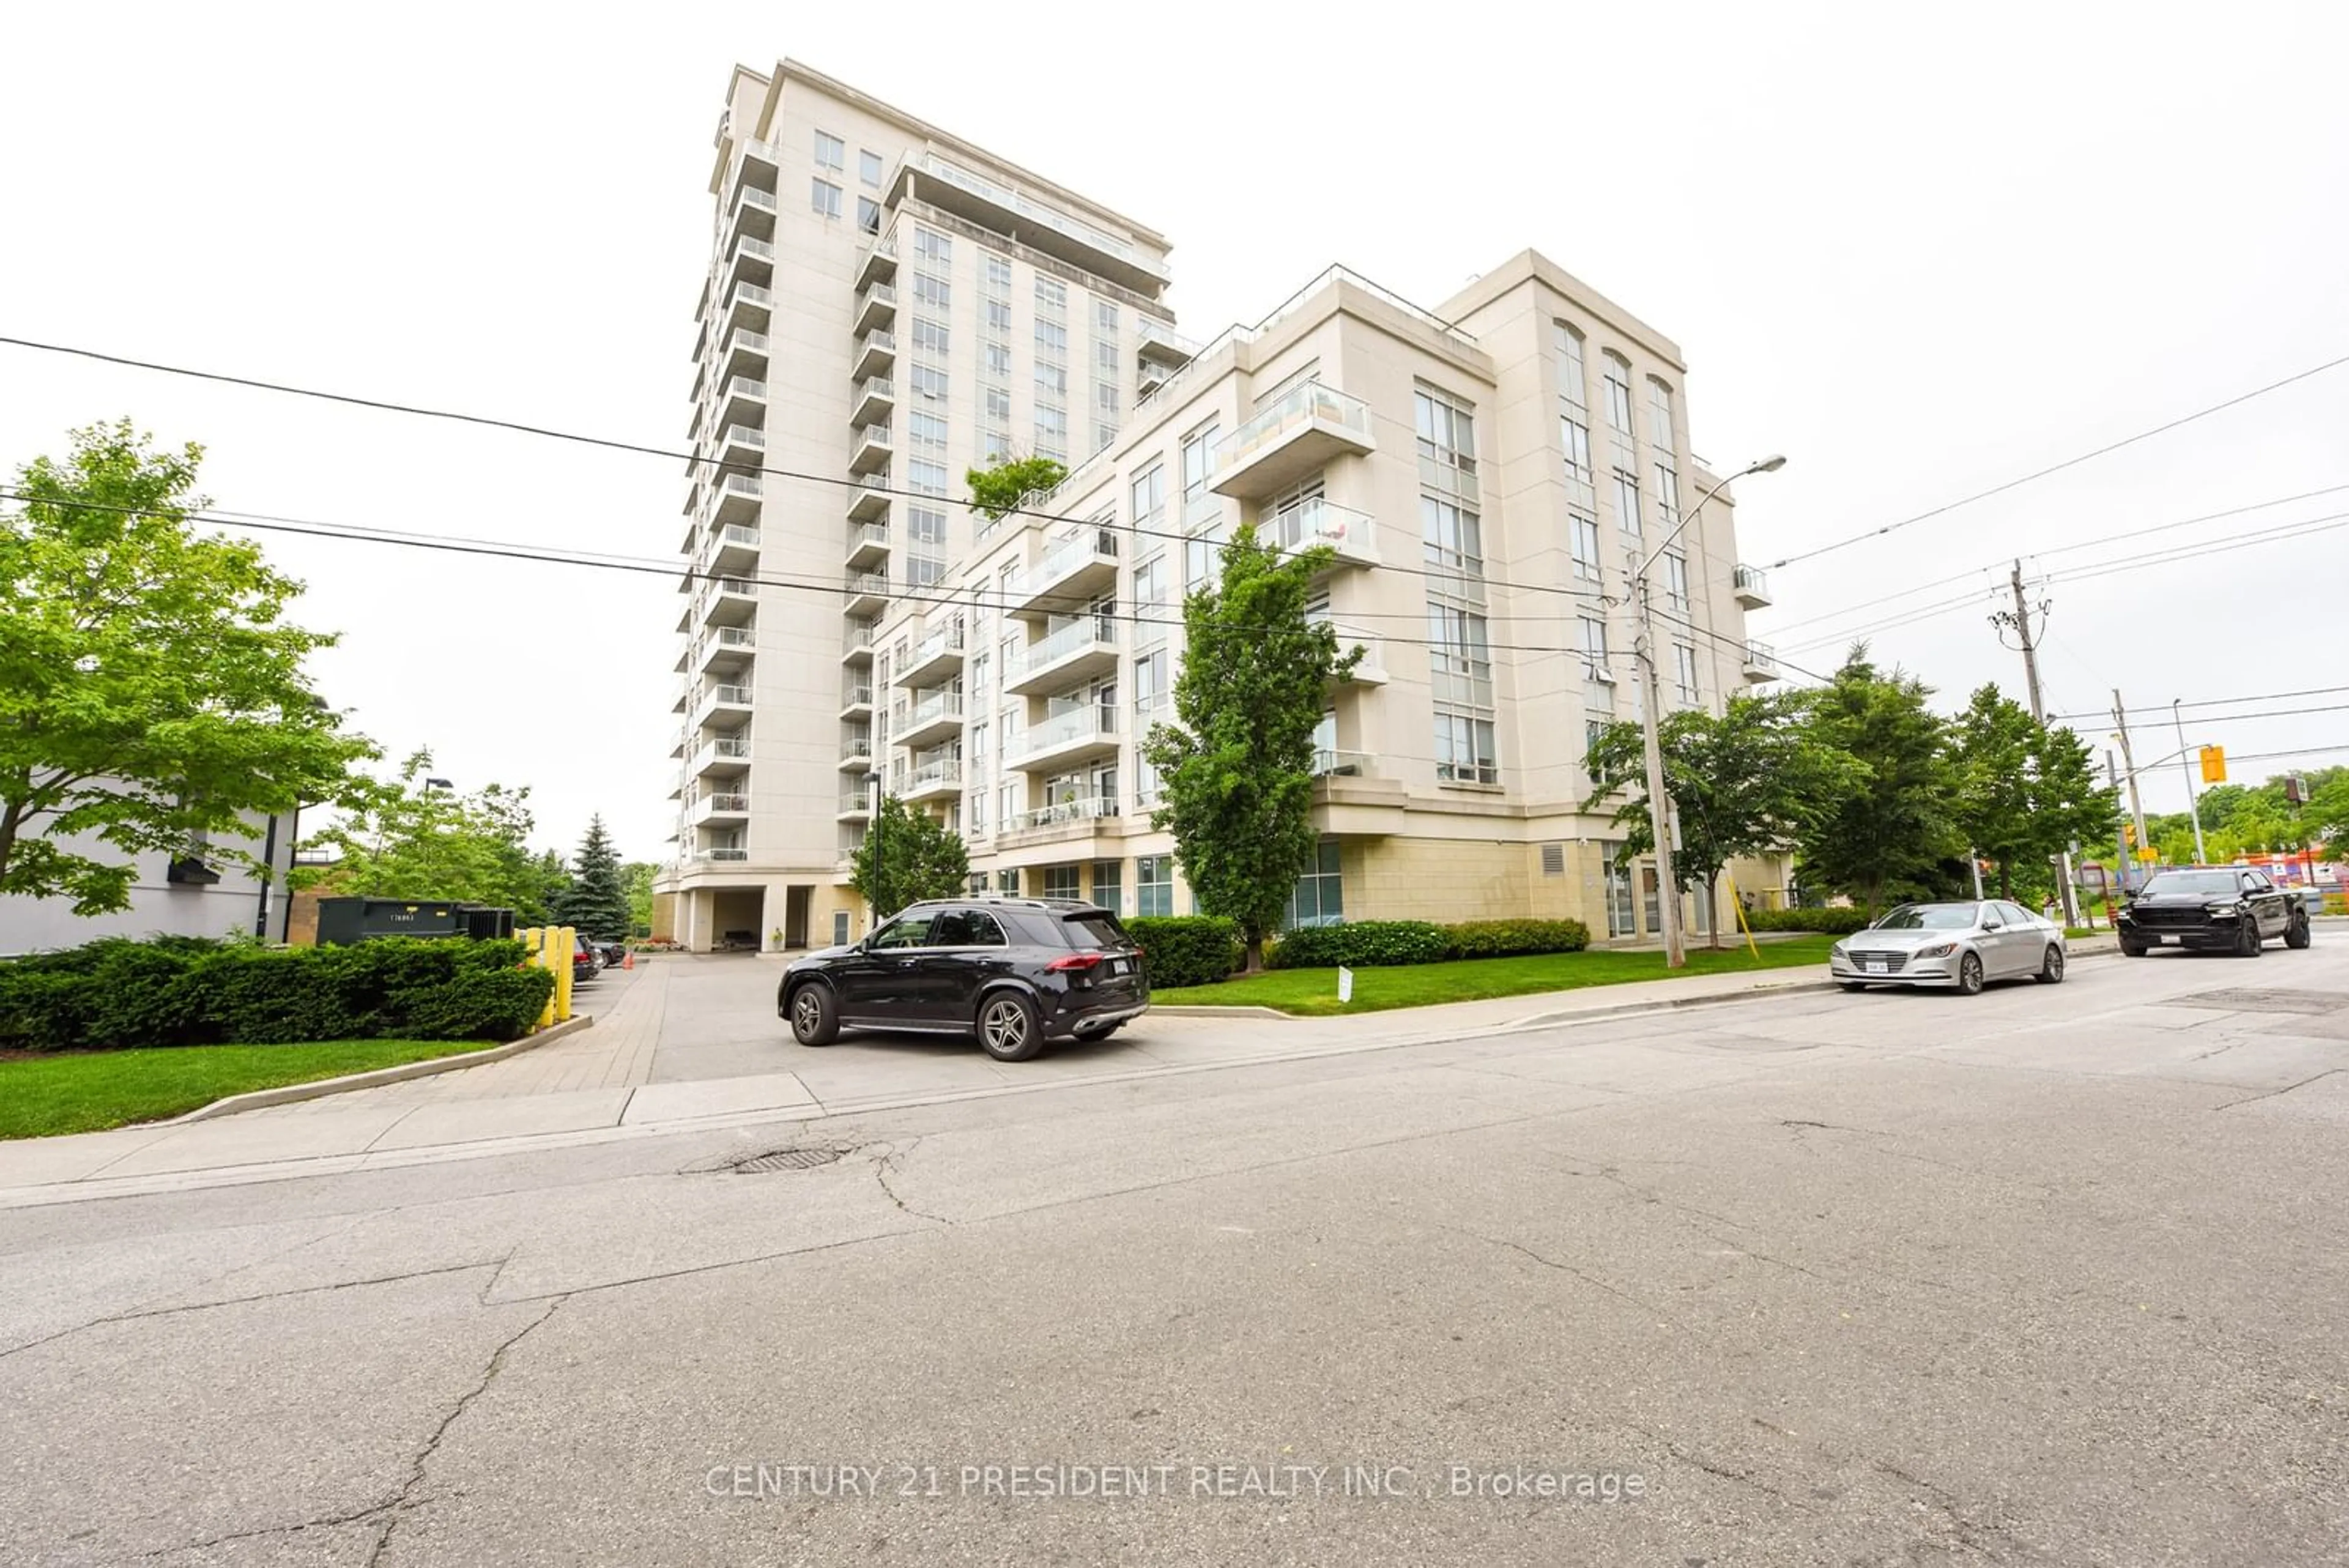 A pic from exterior of the house or condo for 3865 Lake Shore Blvd #1101, Toronto Ontario M8W 1R4